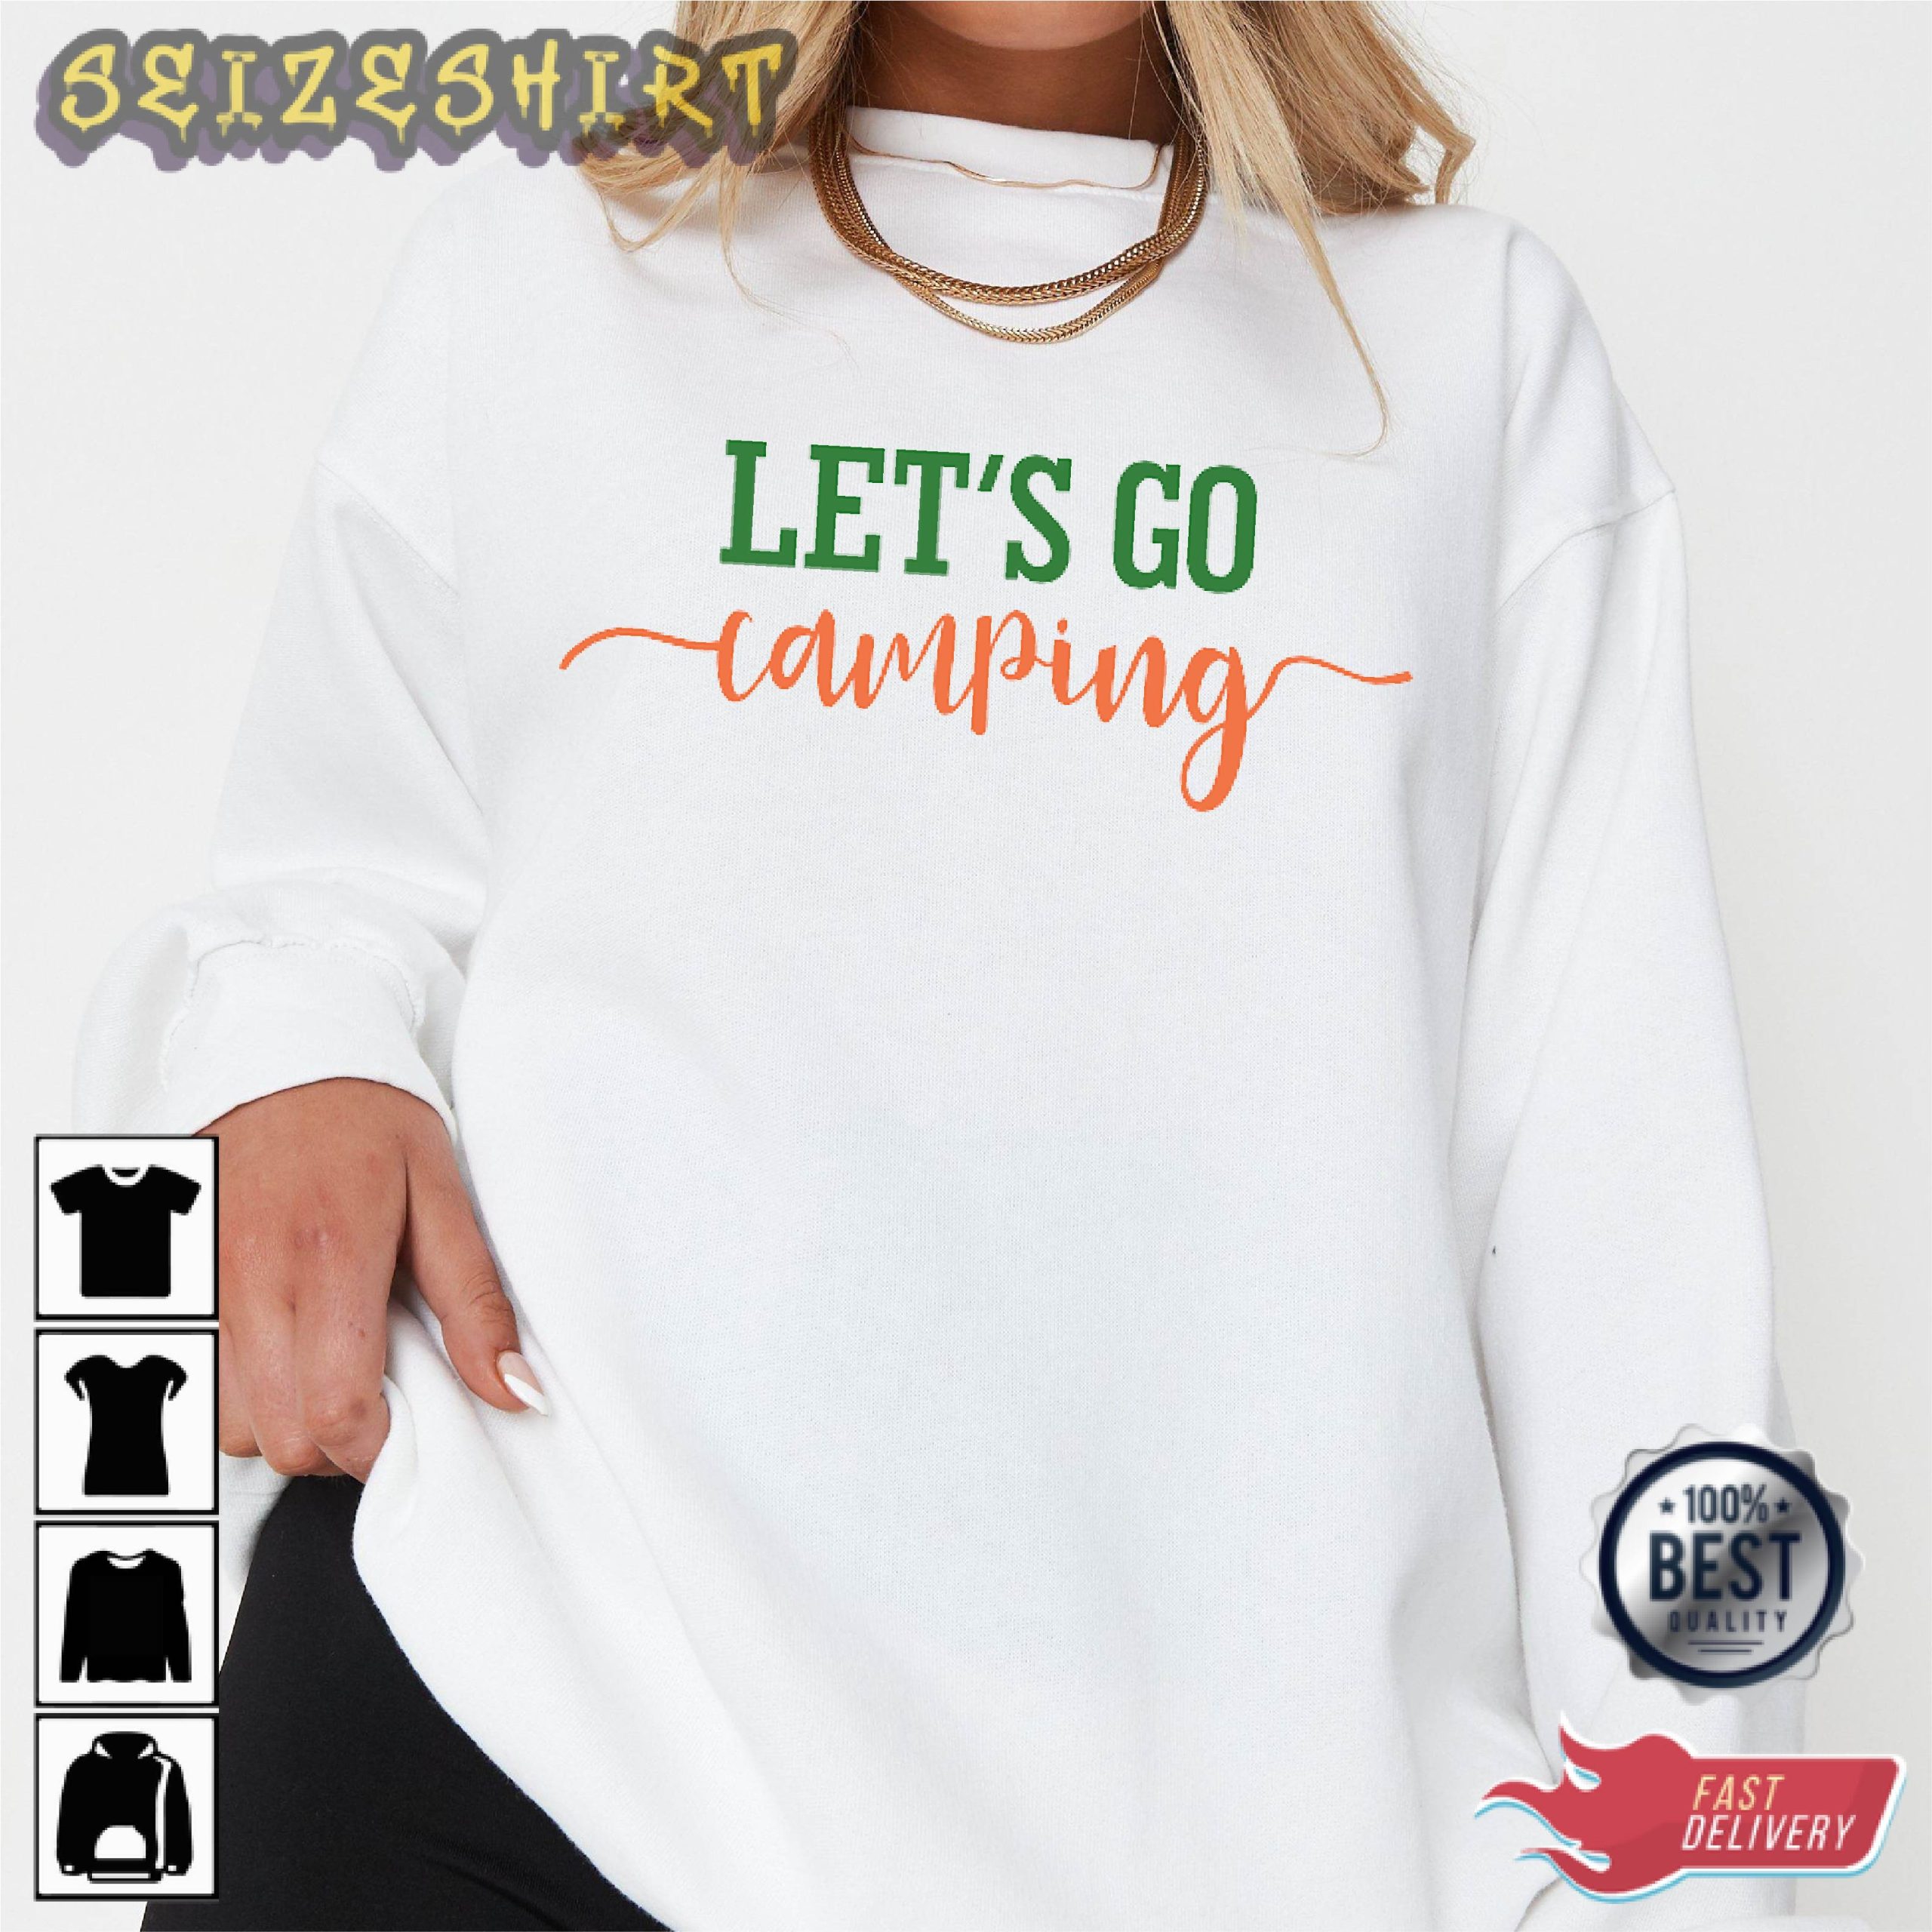 Let's Go Camping In The Mountain Graphic Tee